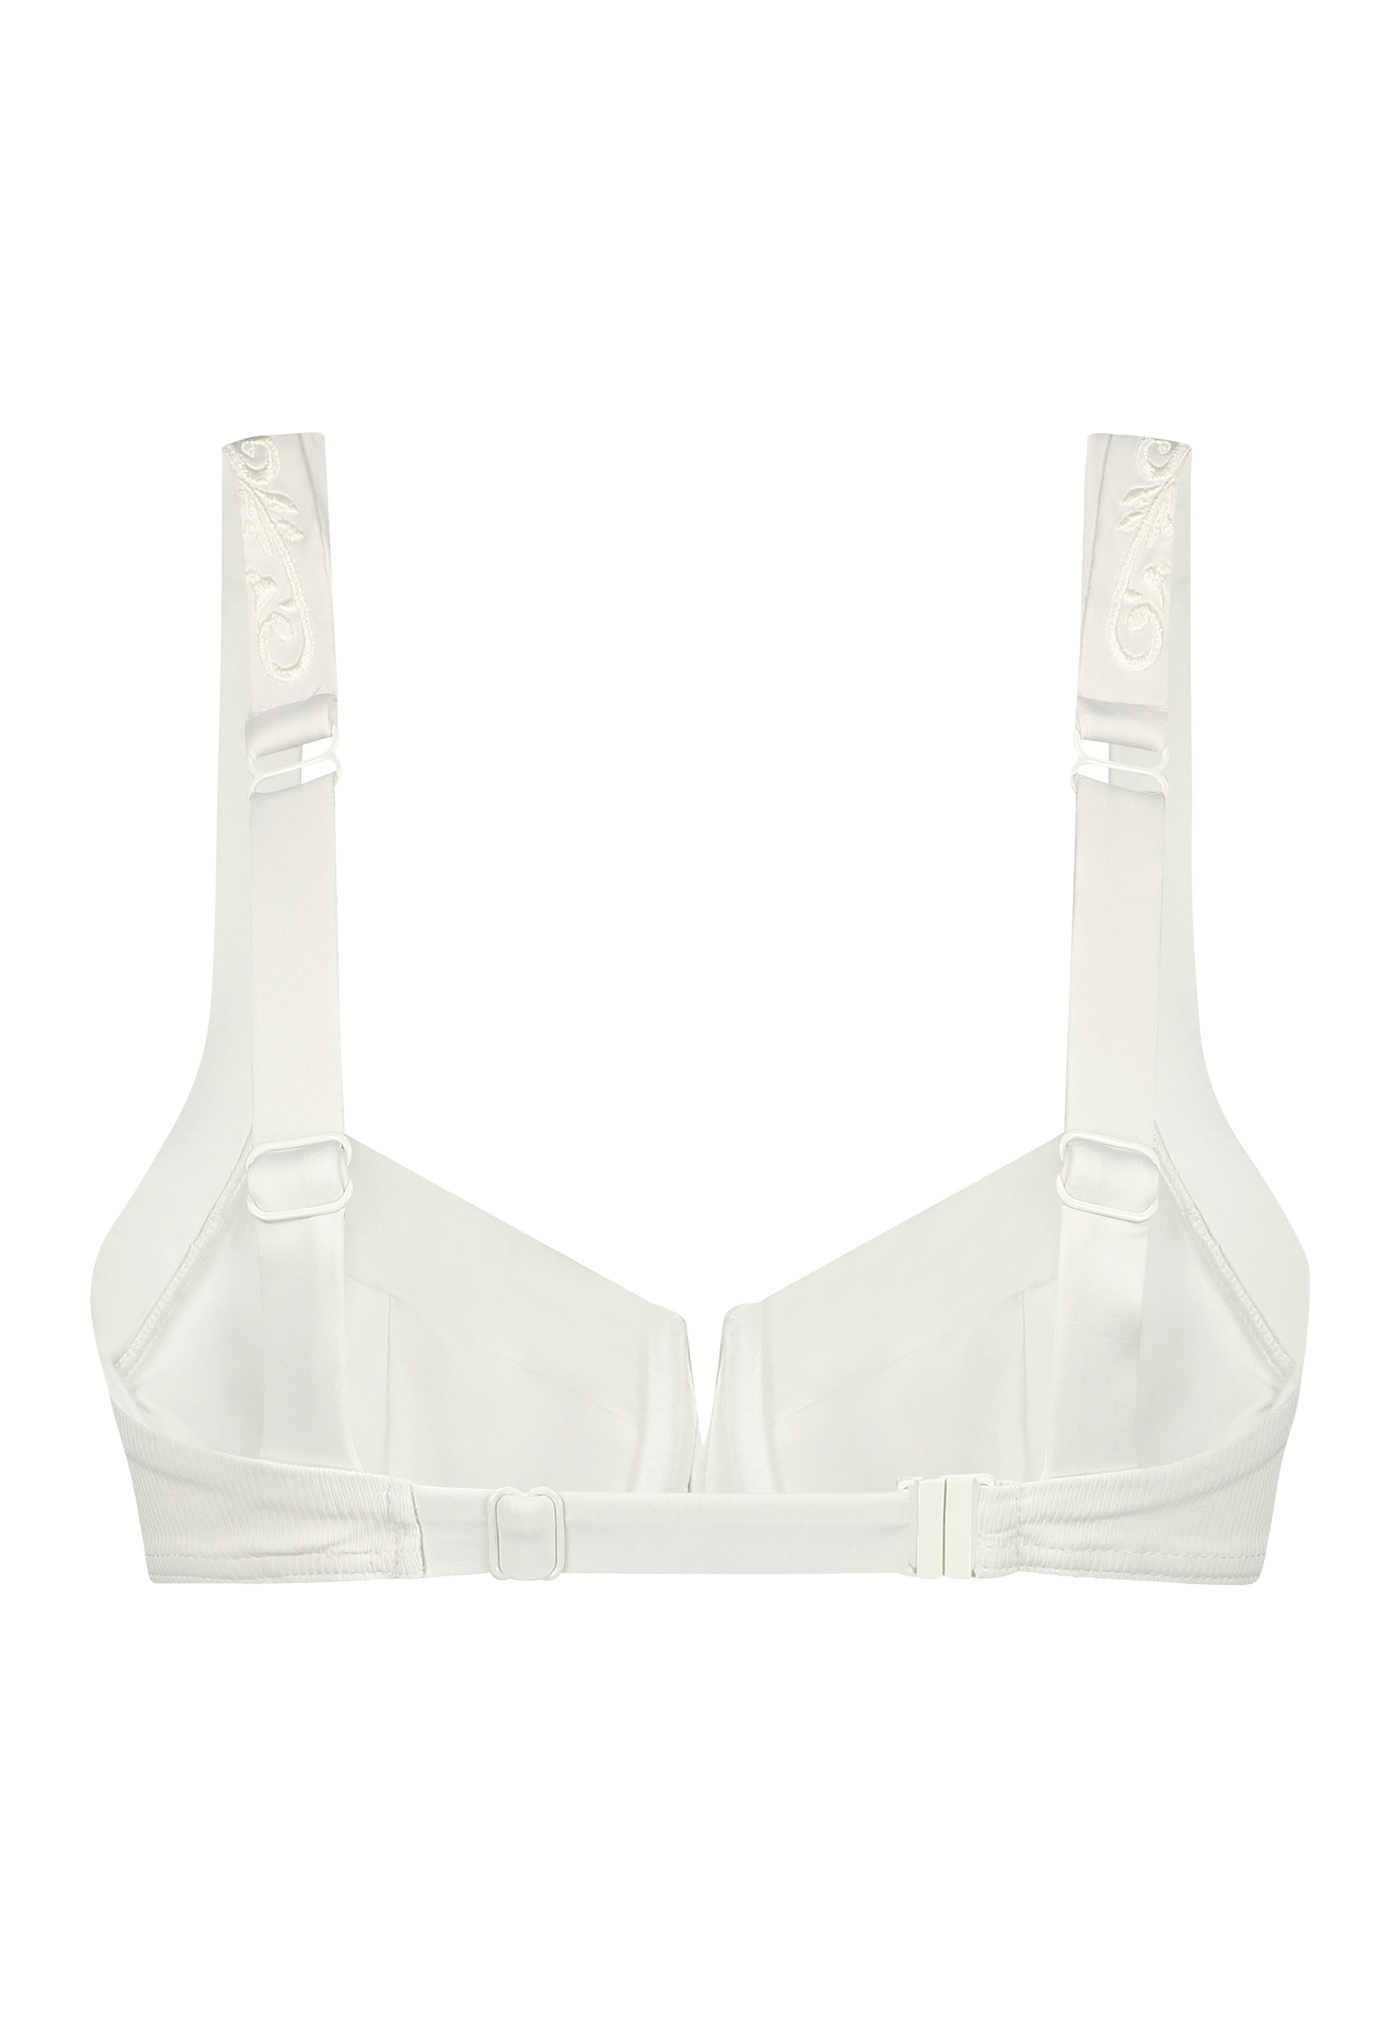 Bikini top with underwire in white with adjustable band size and shoulder straps